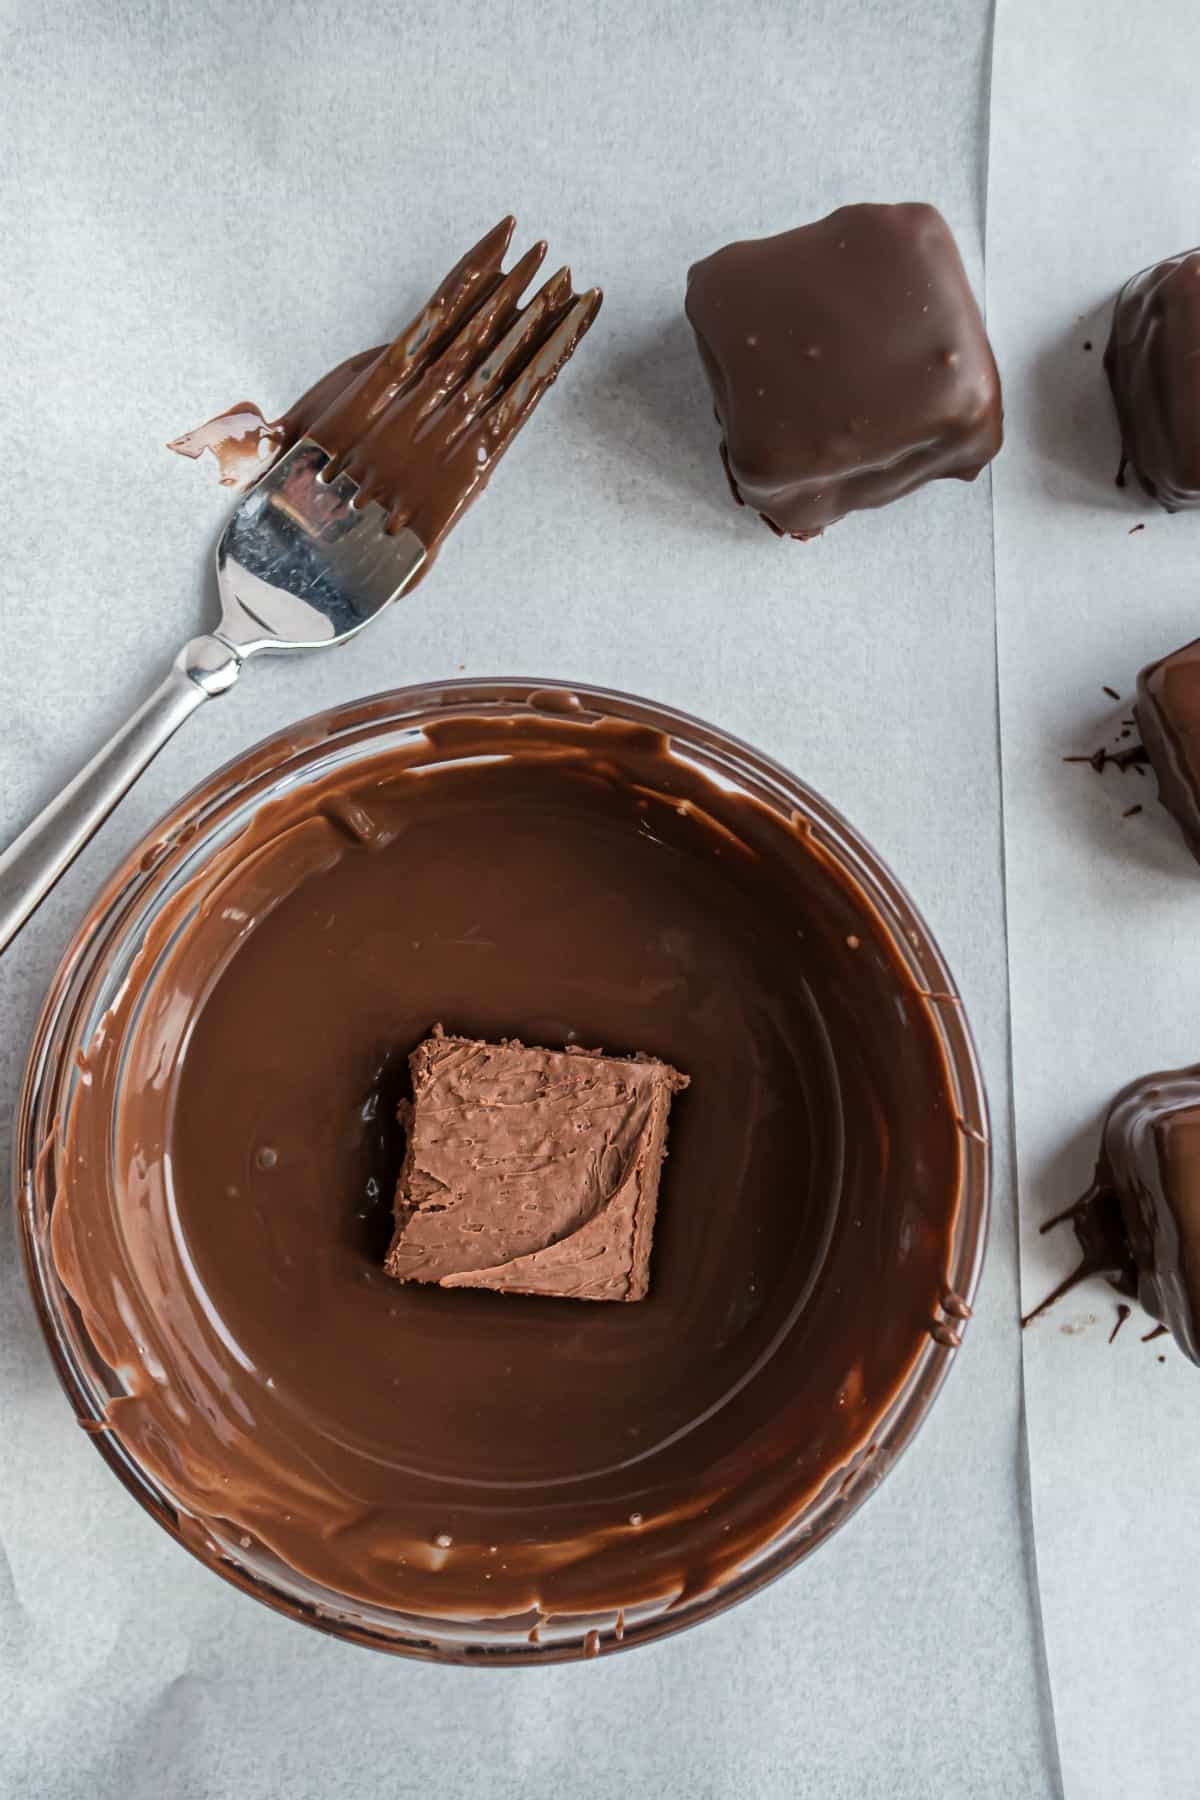 How to dip homemade three muskateers in melted chocolate.